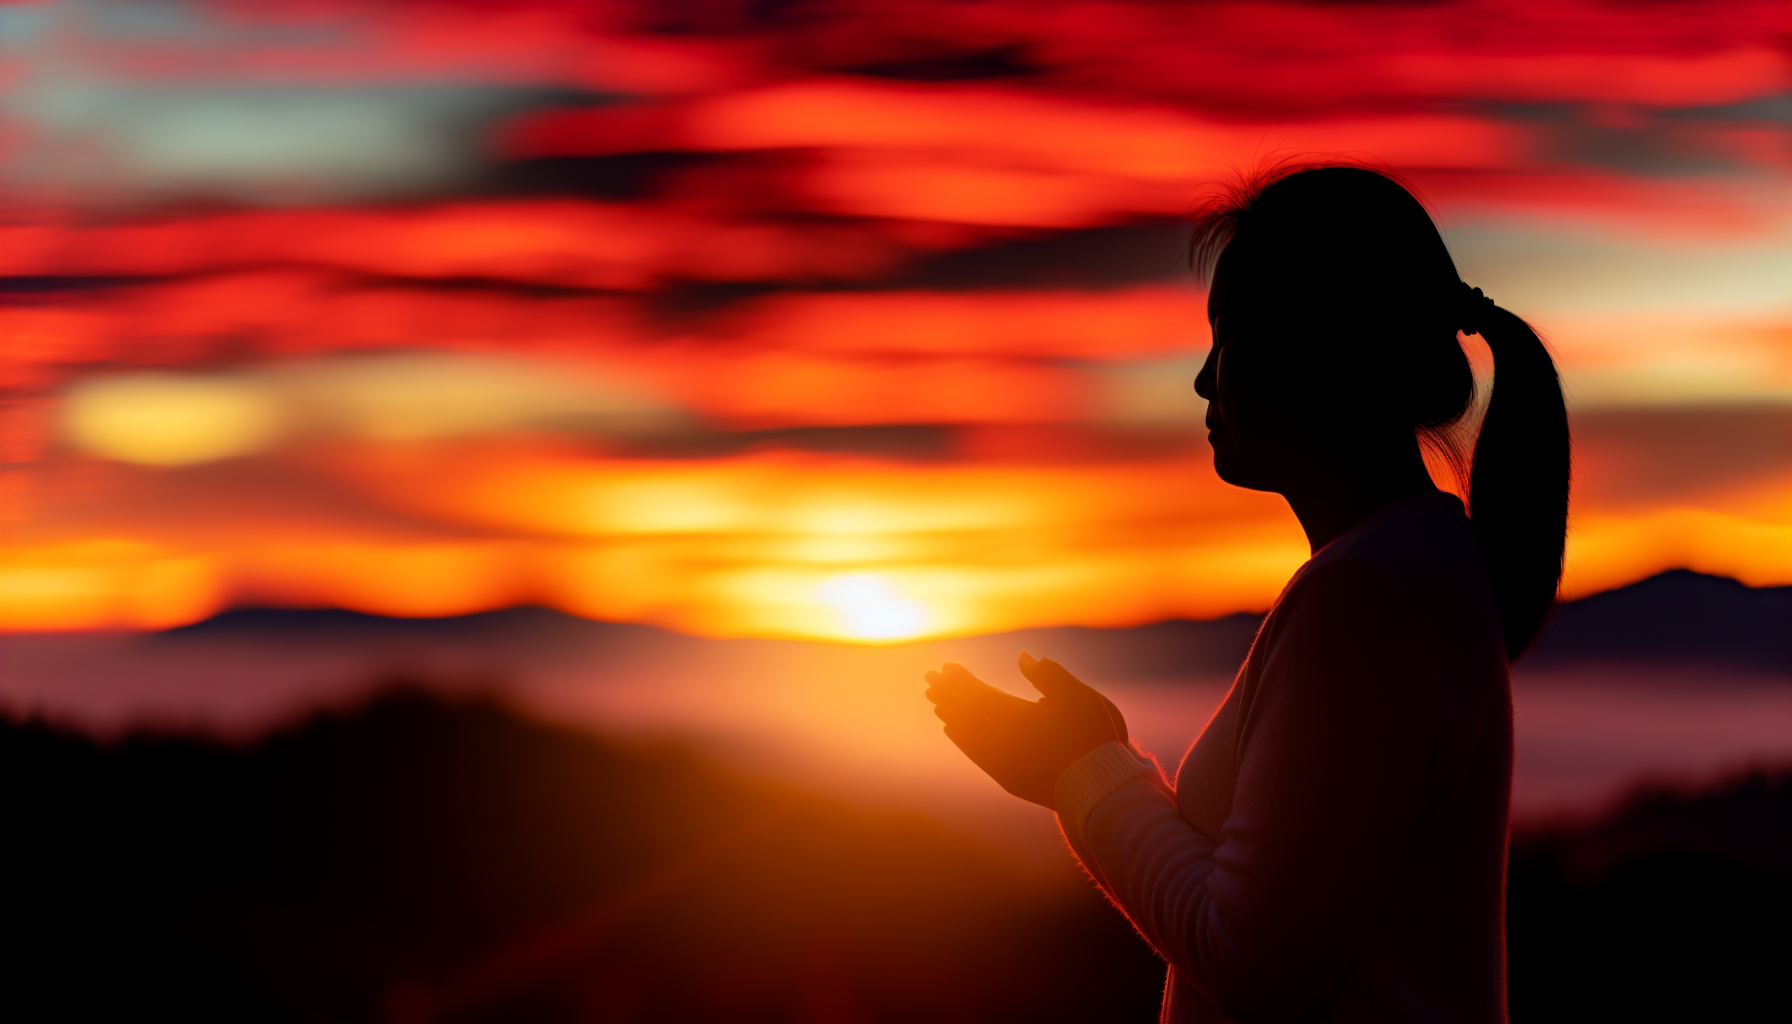 Sunrise with a silhouette of a person in prayer